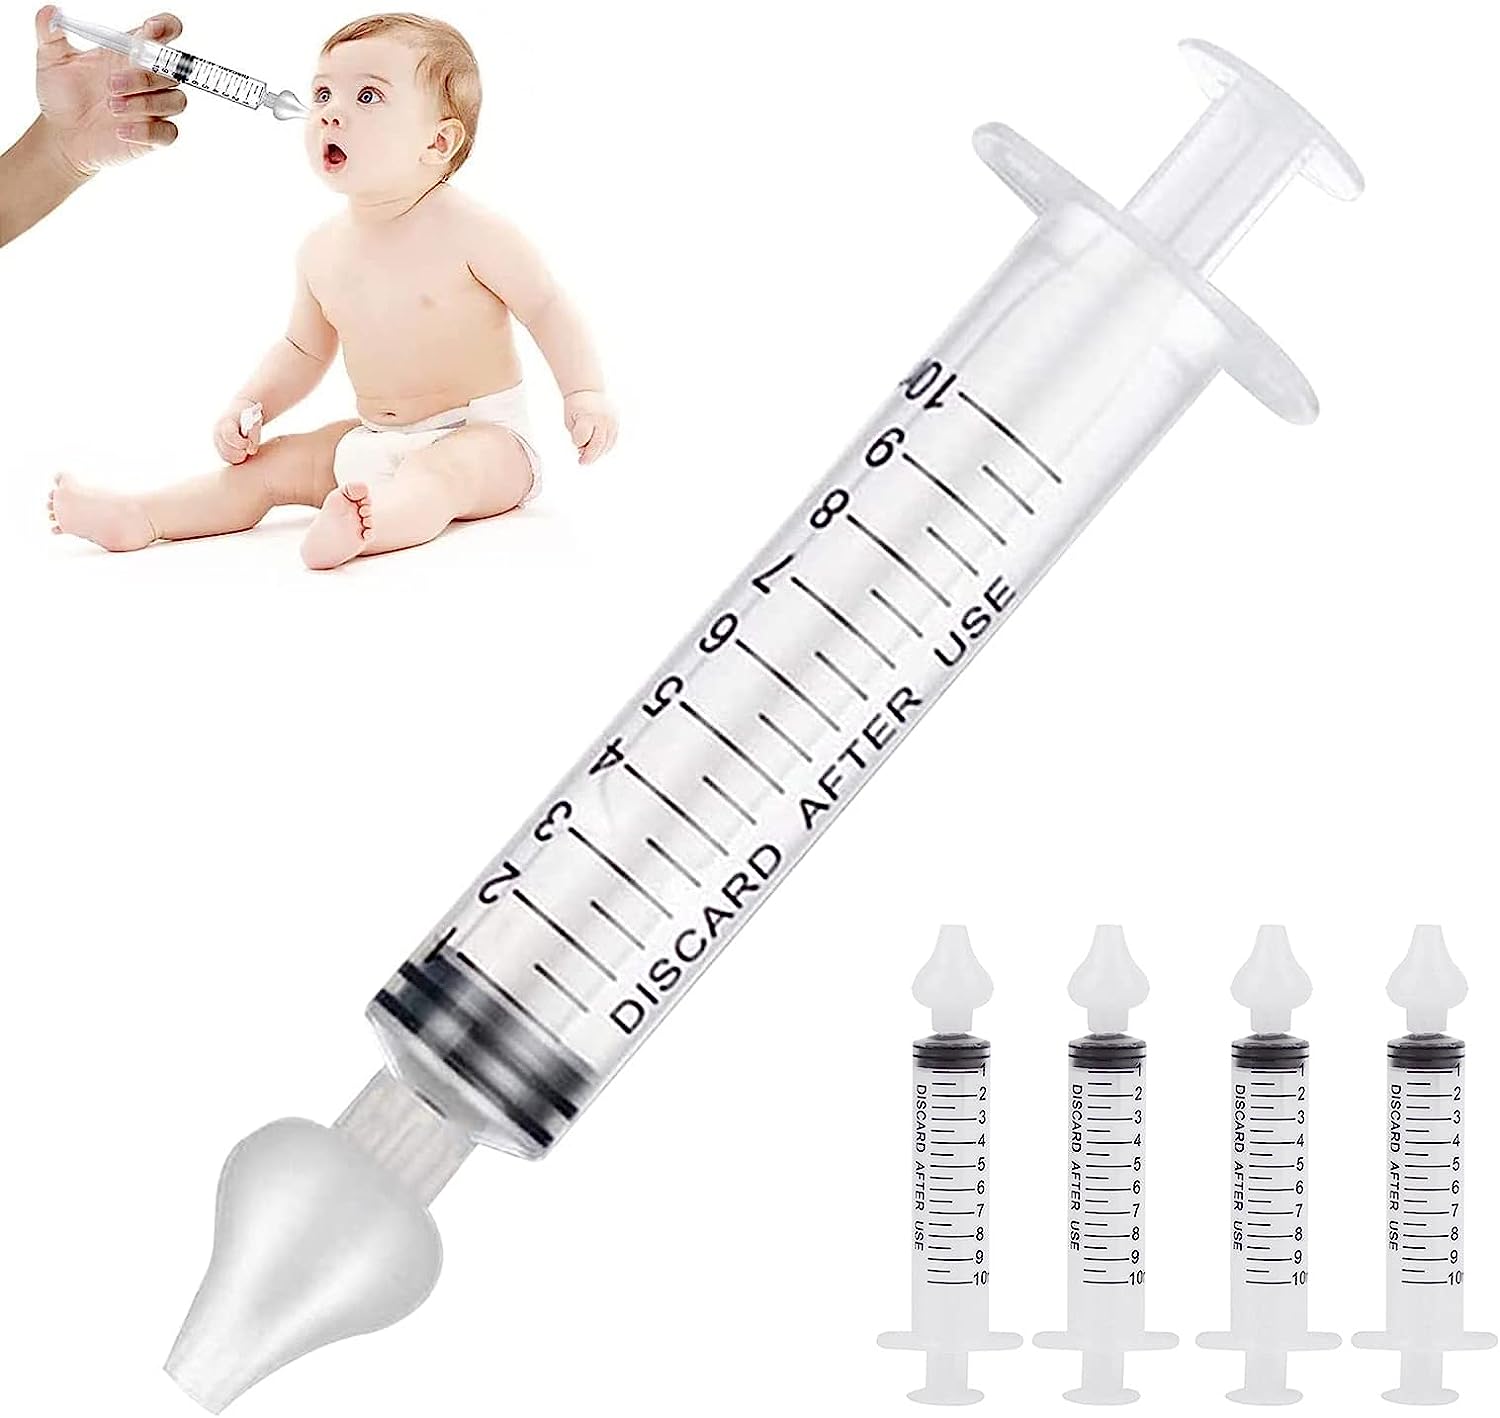 Infant Nasal irrigation, 10ml Nasal irrigation syringe, nasal cleaner with cleanable and reusable silicone nasal suction nozzle, safe nasal cleaner